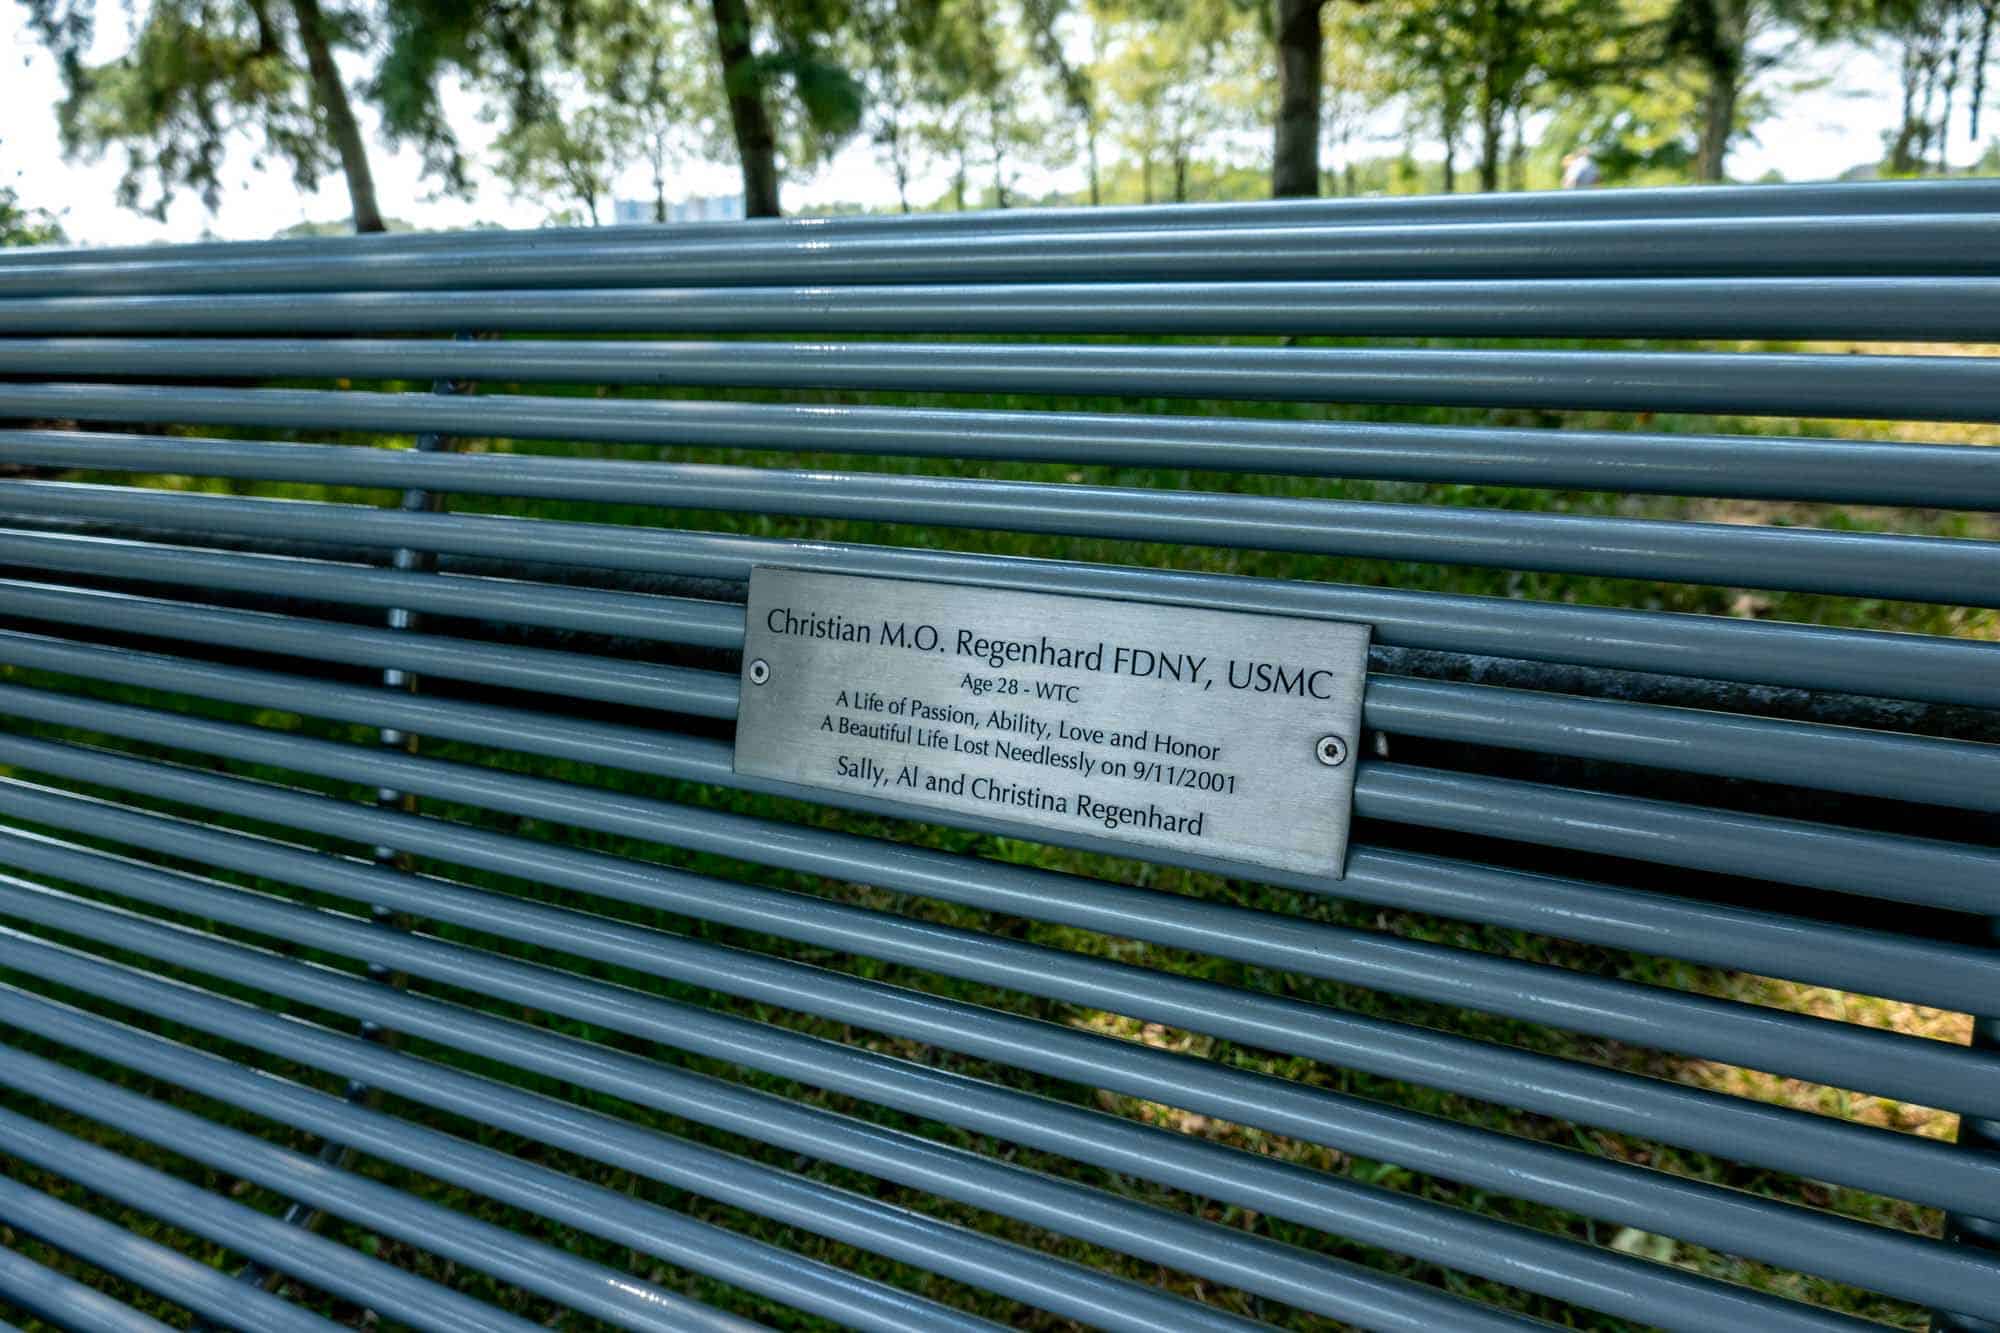 Bench with a dedication plaque: "Christian M.O. Regenhard FDNY, USMC. Age 28 - WTC. A life of passion, ability, love and honor. A beautiful life lost needlessly on 9/11/2001. Sally, Al and Christina Regenhard"